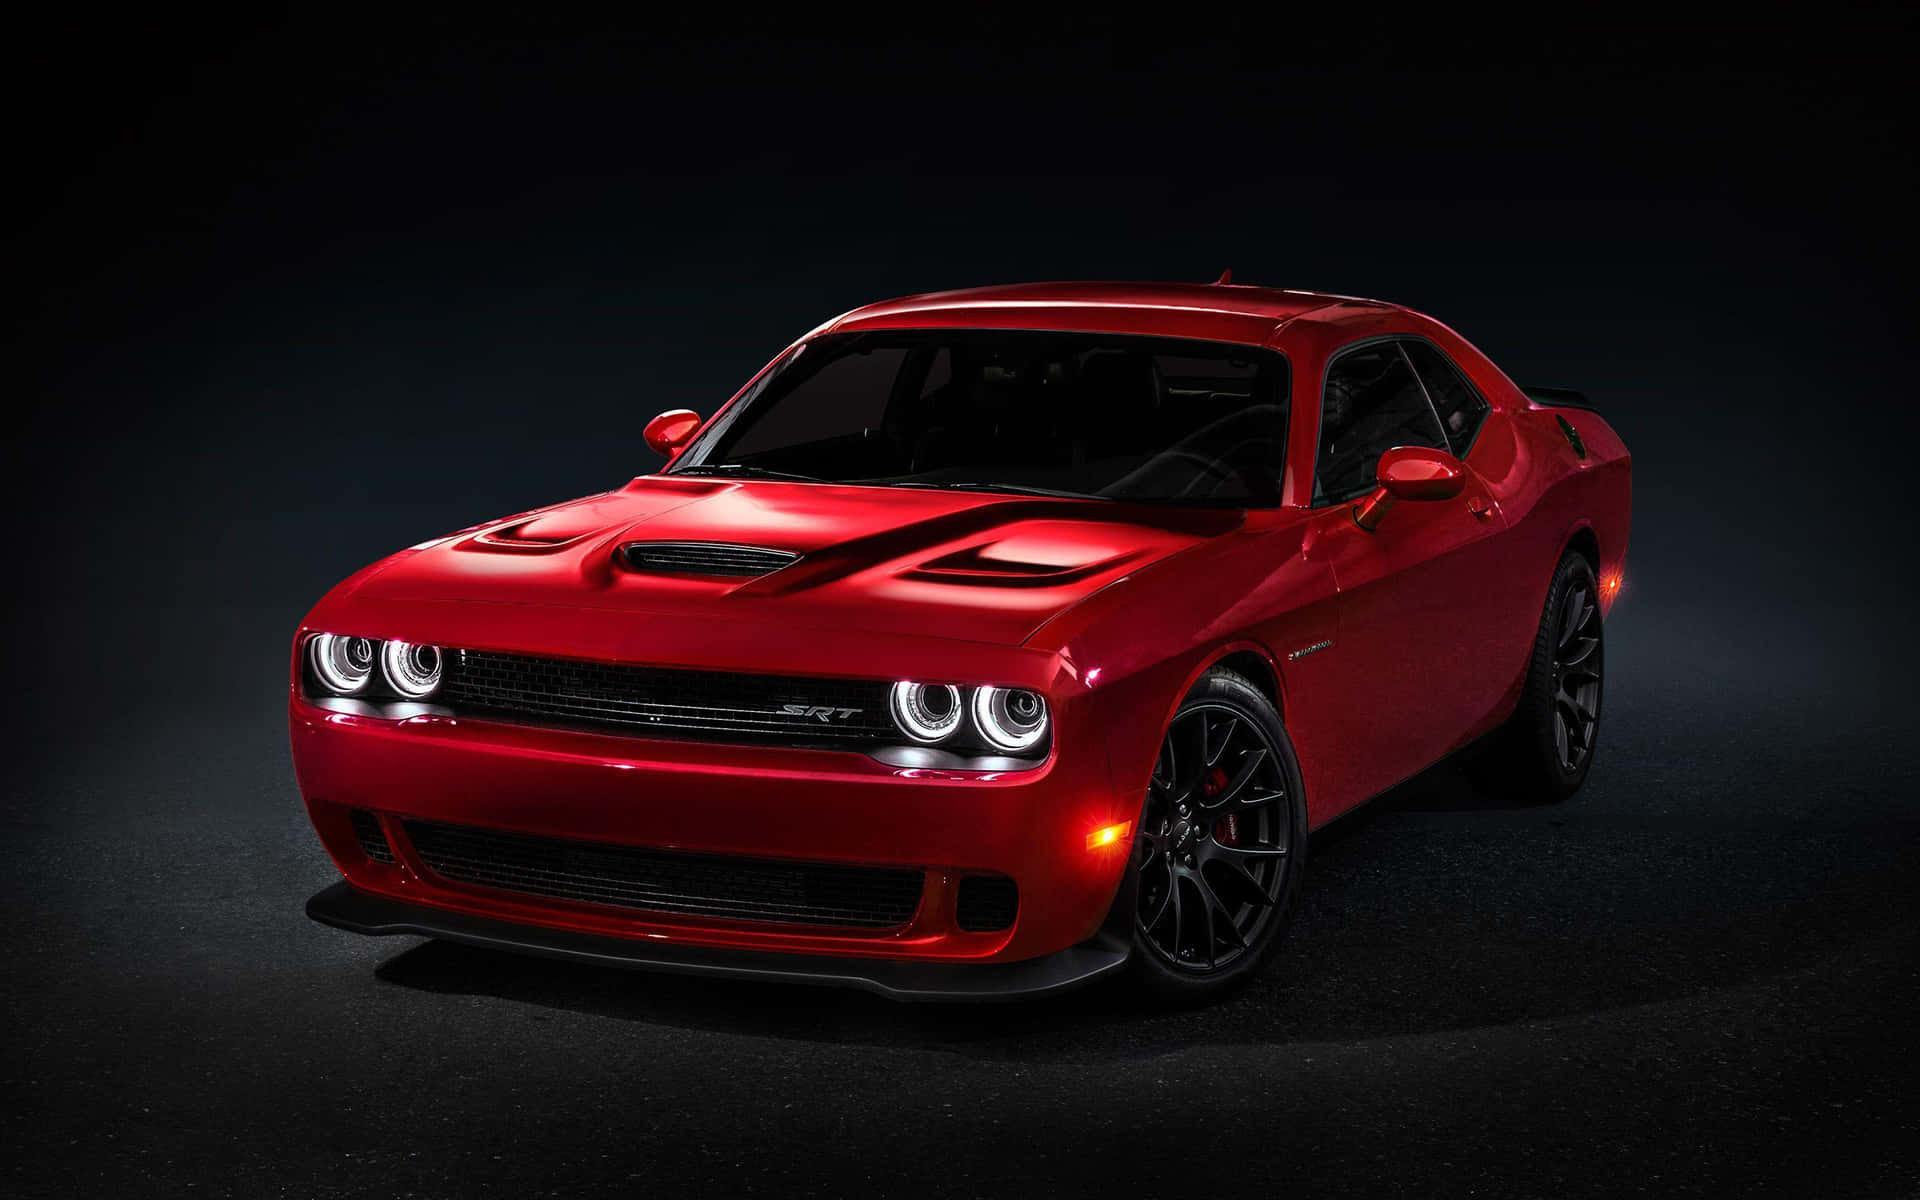 The Red Dodge Challenger Is Shown In A Dark Room Background